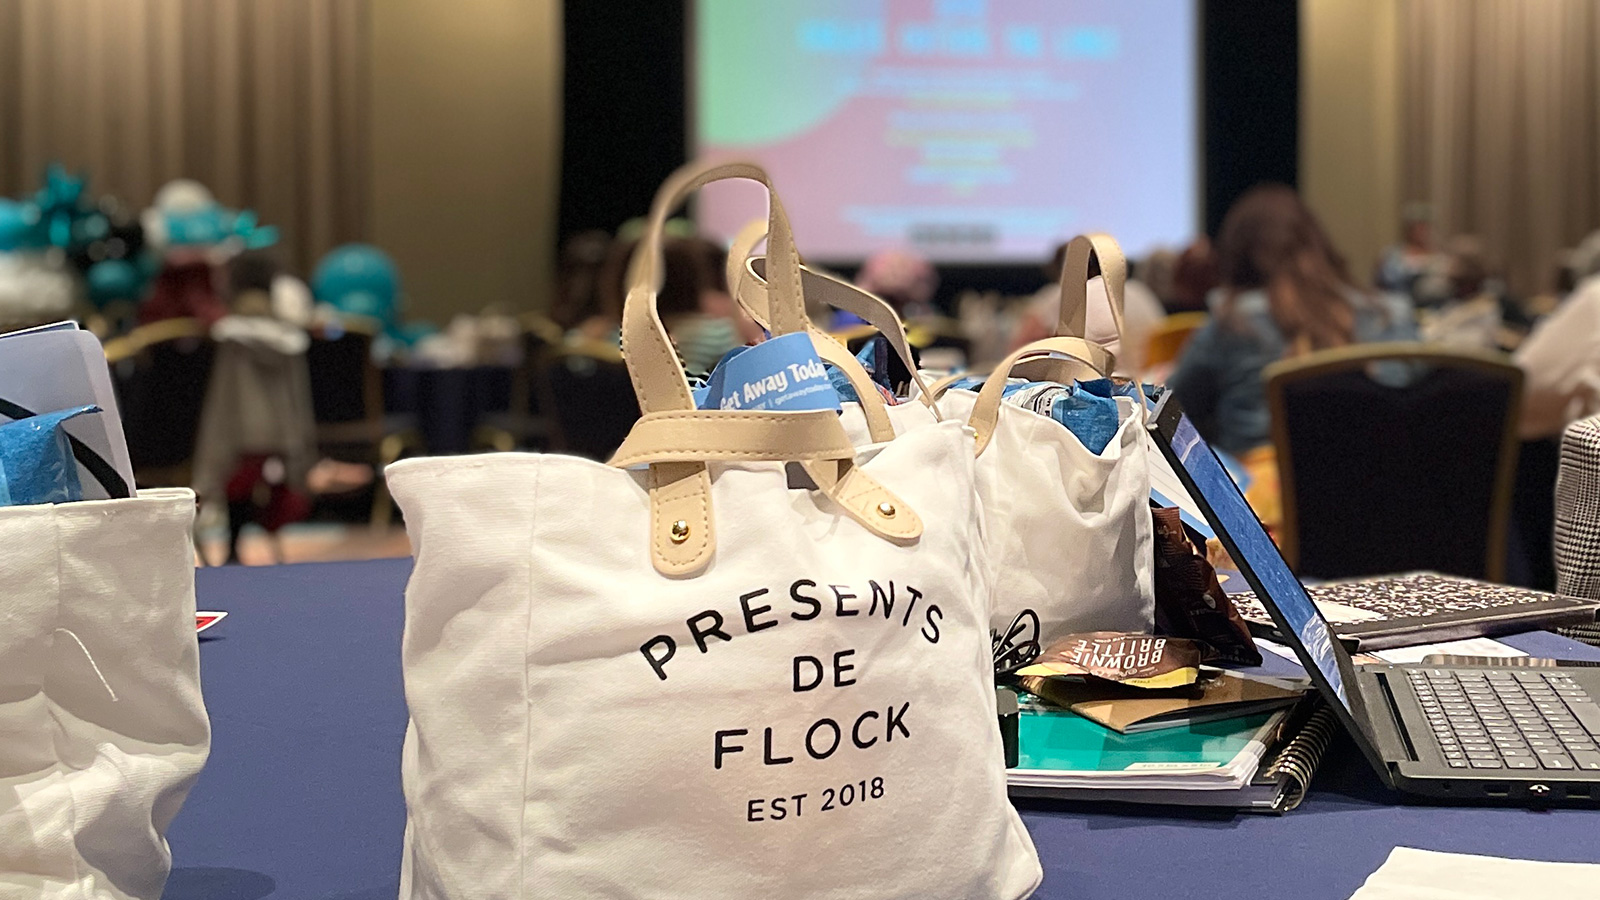 Tote bags at a recent FLOCK event